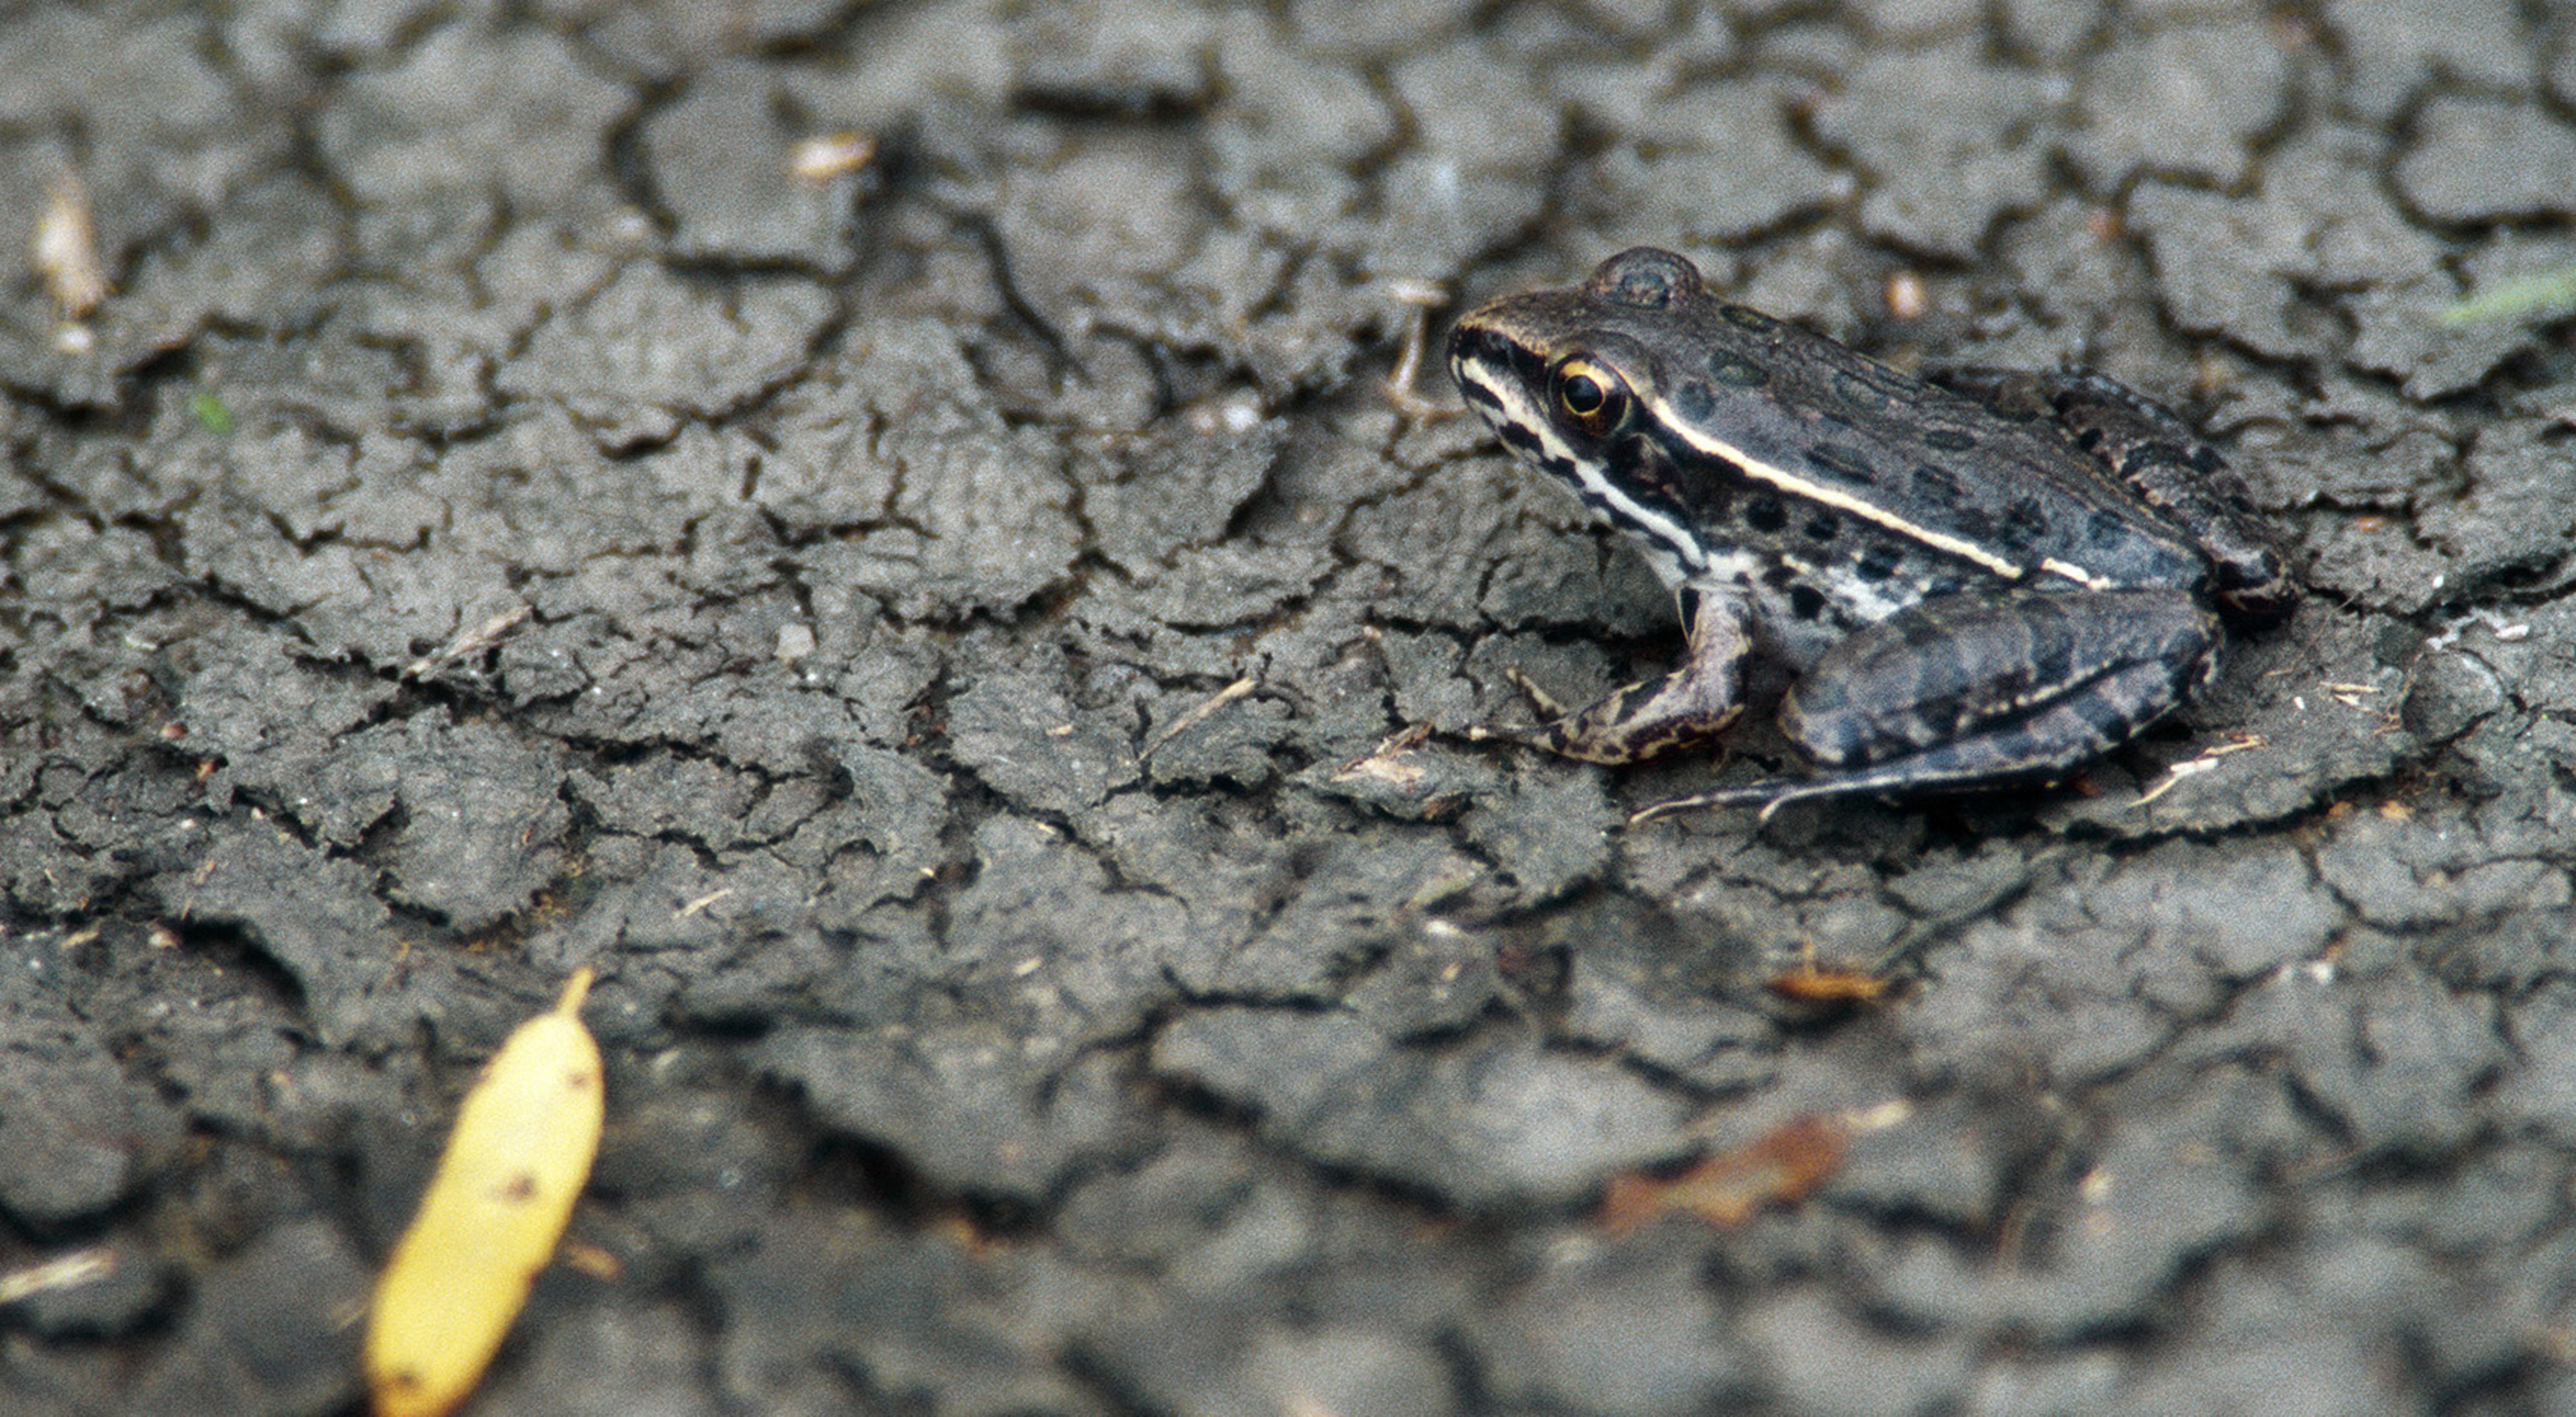 Photo of a frog sitting in a gray, dried-up puddle.